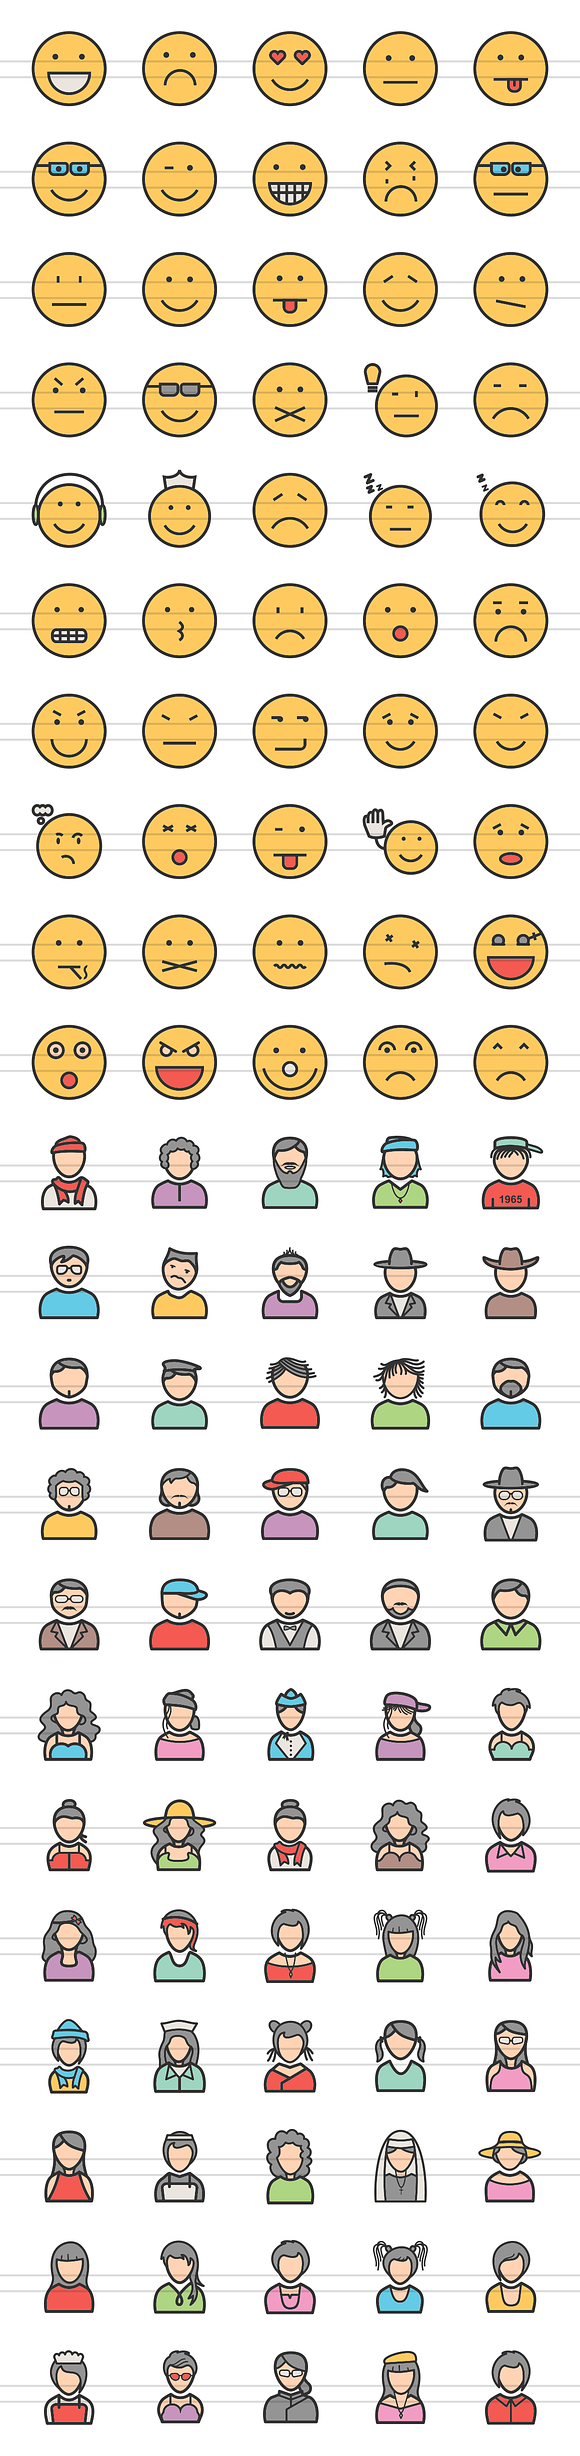 110 Avatars & Emoticons Filled Icons in Icons - product preview 1